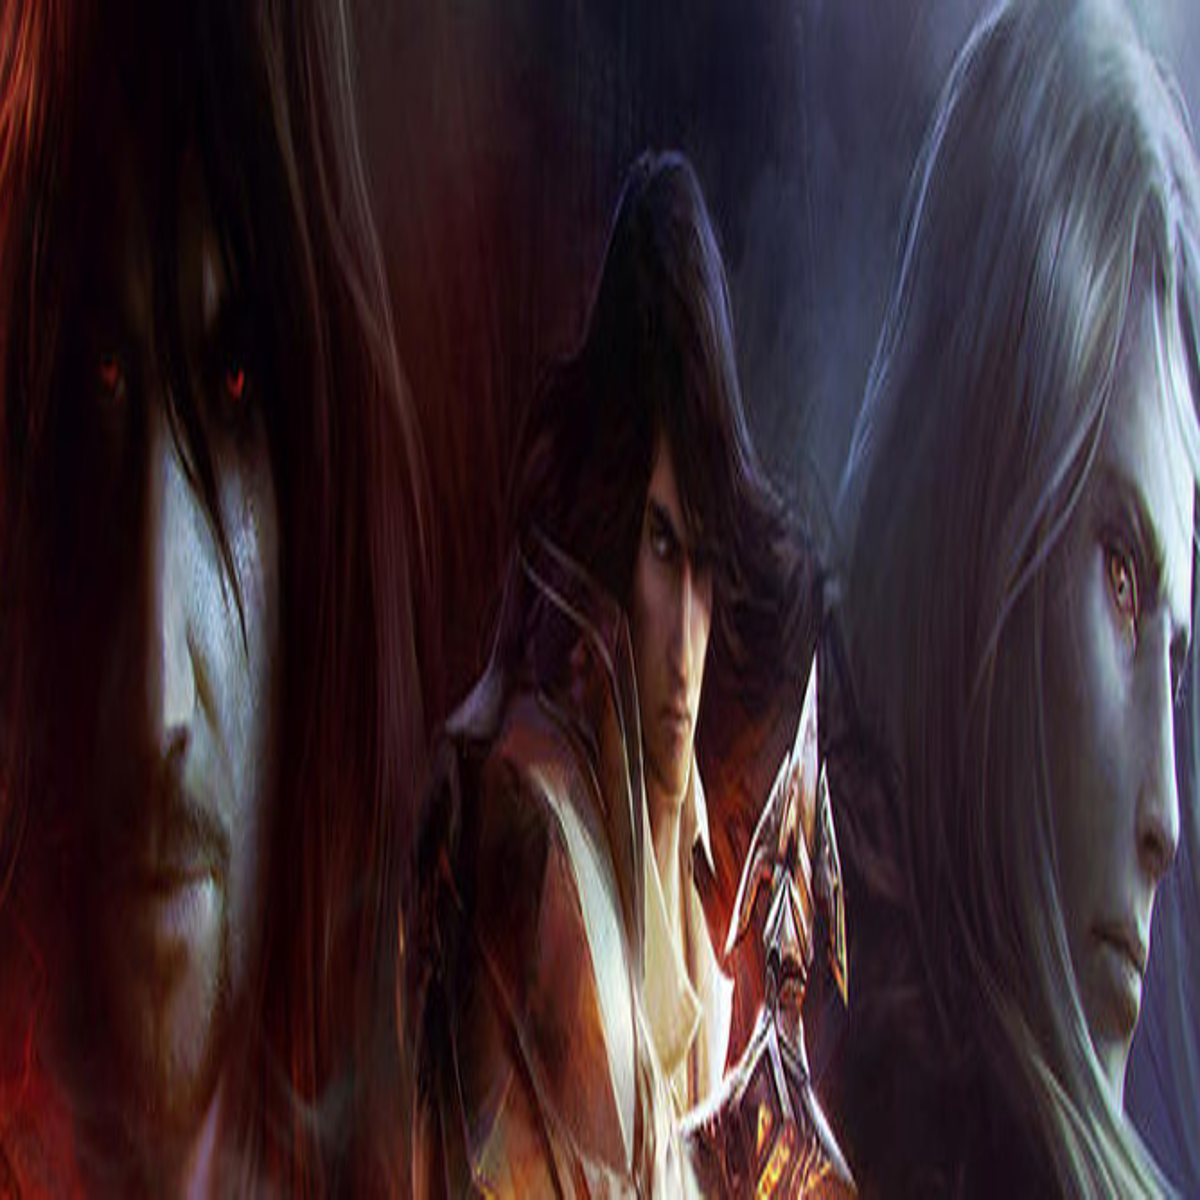 Castlevania: Lords of Shadow - Mirror of Fate HD to be Released Digitally  on PS3 and 360